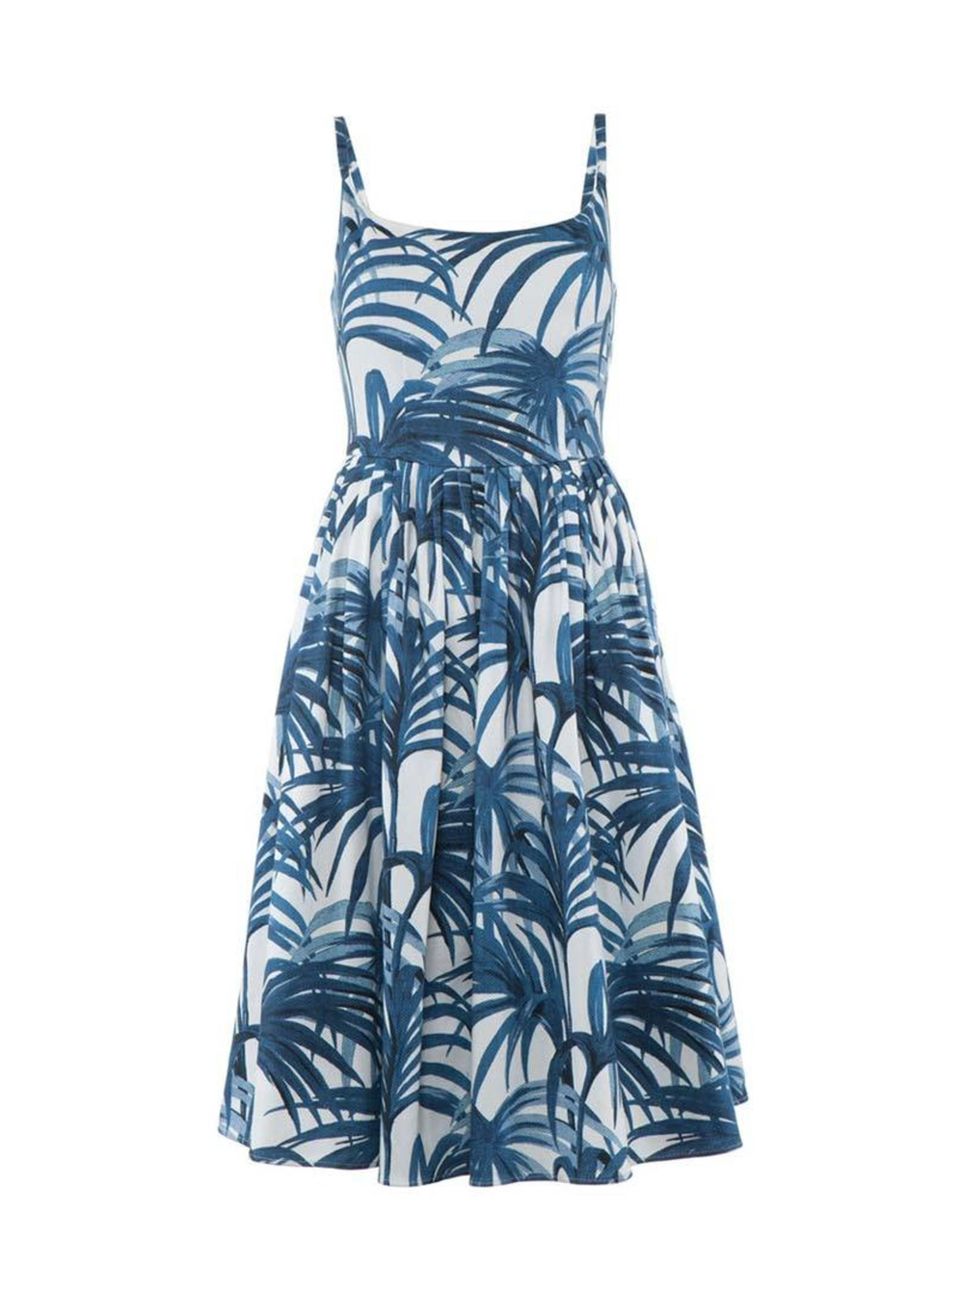 <p>Bring a little of the tropics to greyscale London.</p>

<p> </p>

<p><a href="http://www.houseofhackney.com/new-in/clothing/palmeral-eleanor-dress-white-azure.html" target="_blank">House of Hackney</a> dress, £295</p>